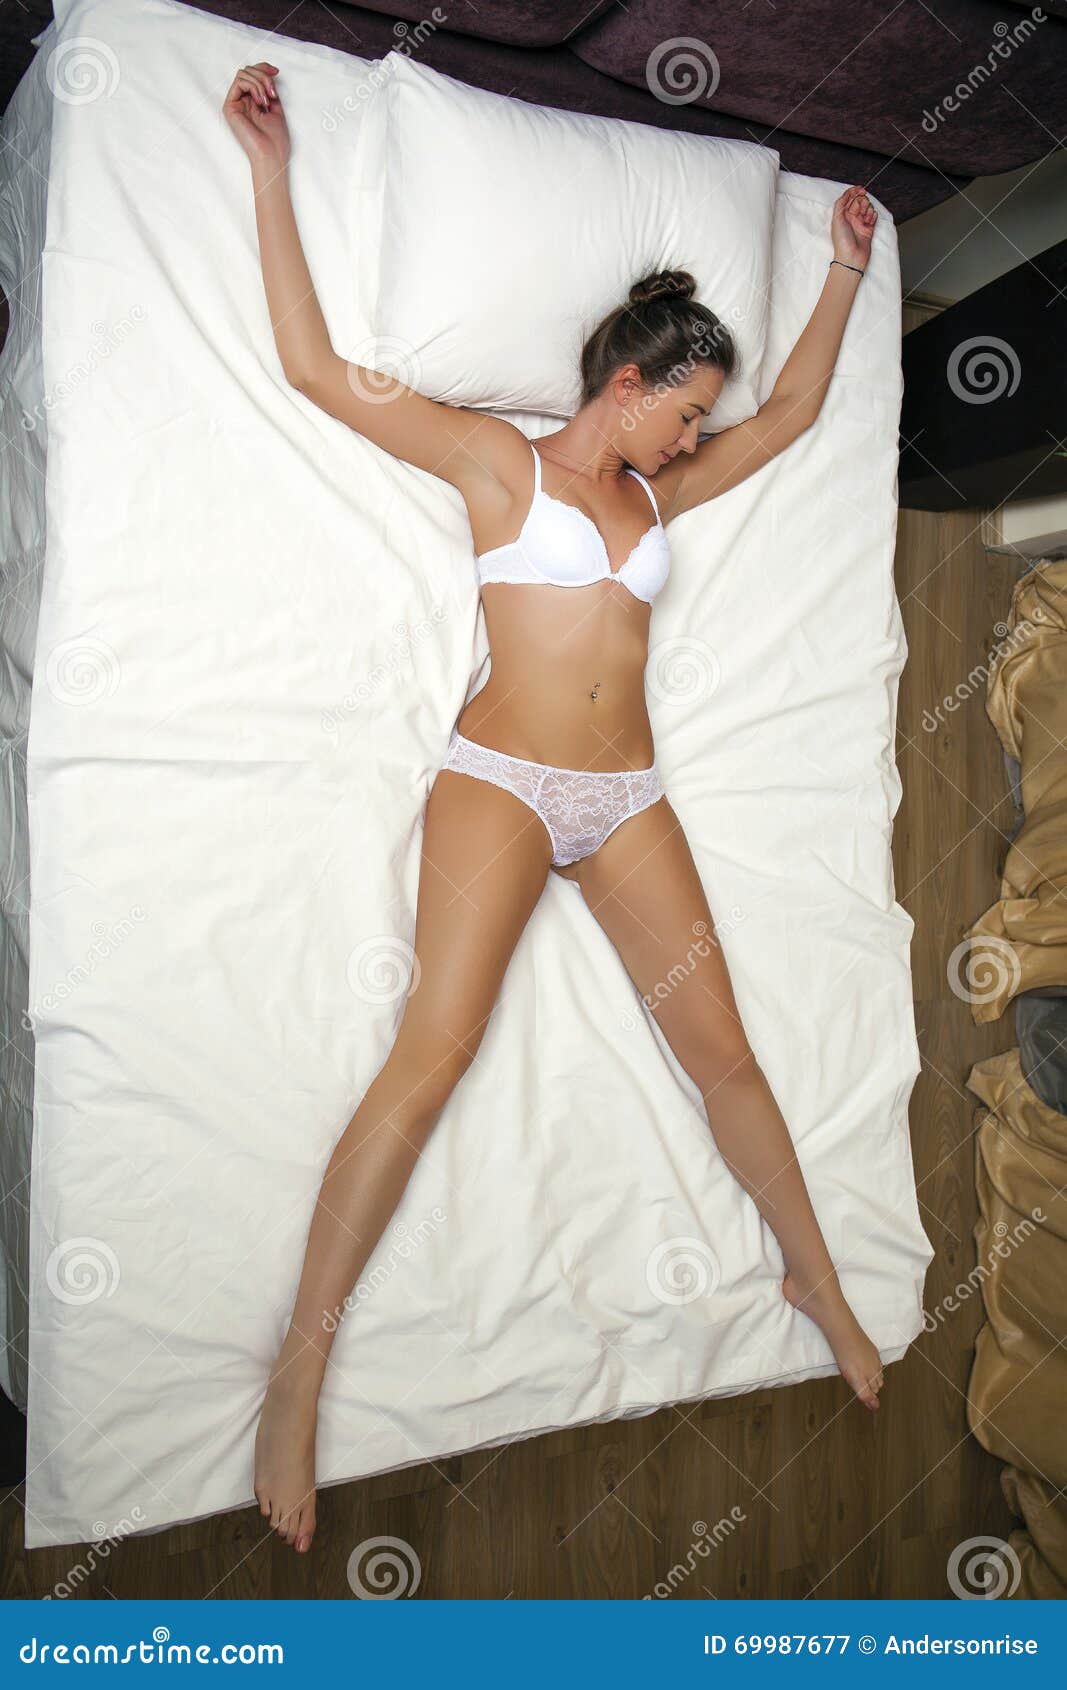 Sleeping Positions. Young Woman in White Underwear Sleeping Stock Image -  Image of attractive, figure: 69987677